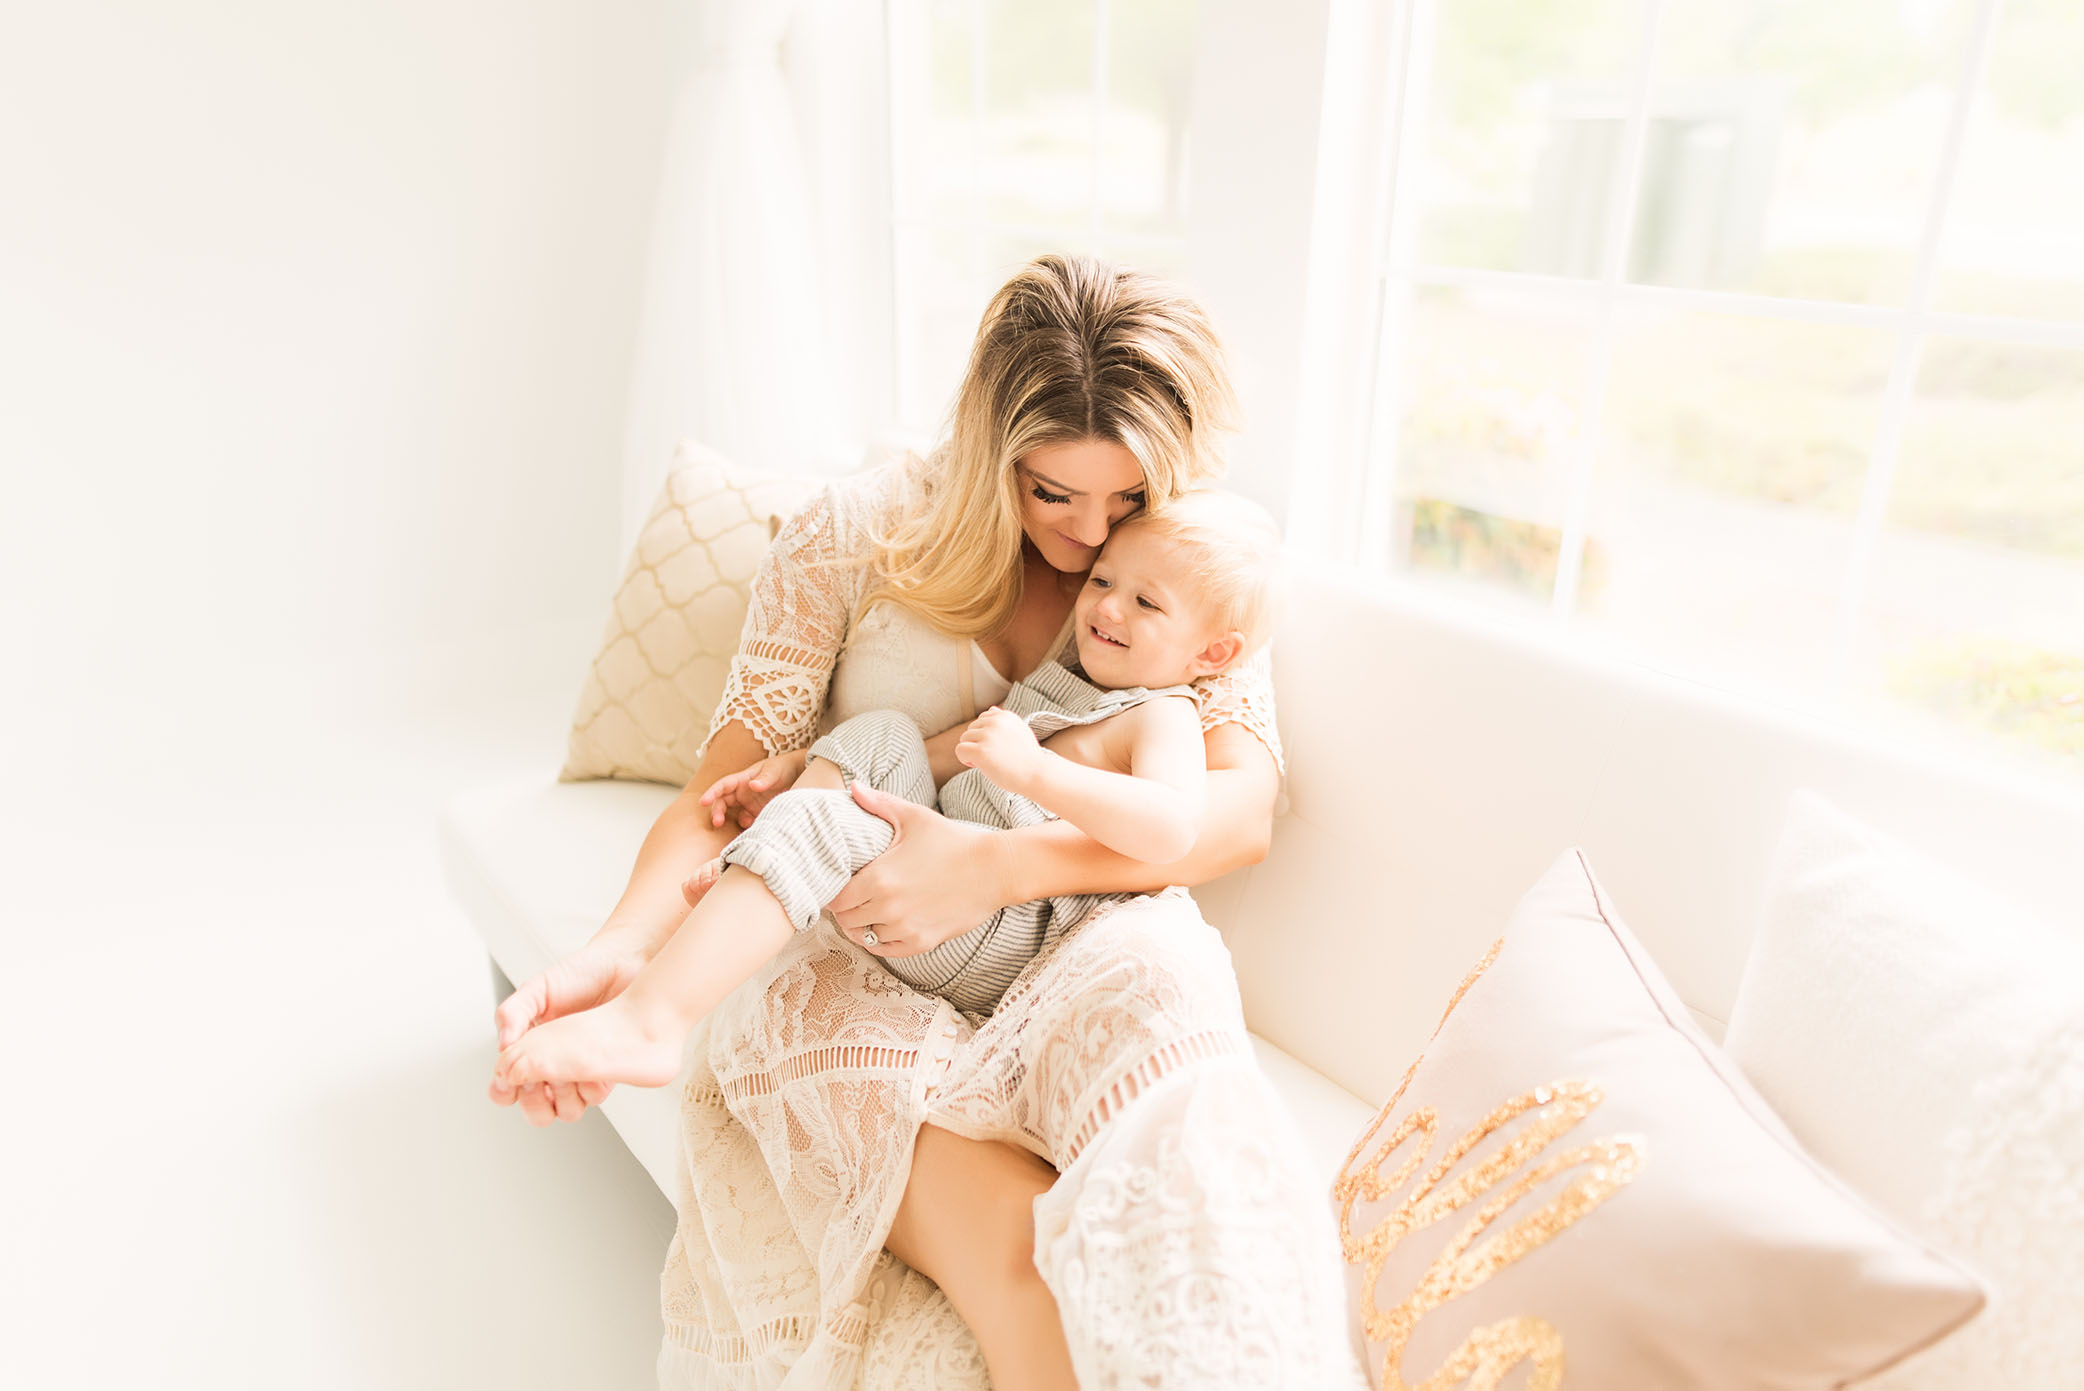 Cuddle time on the couch captured by Sweet Beginnings Photography by Stephanie